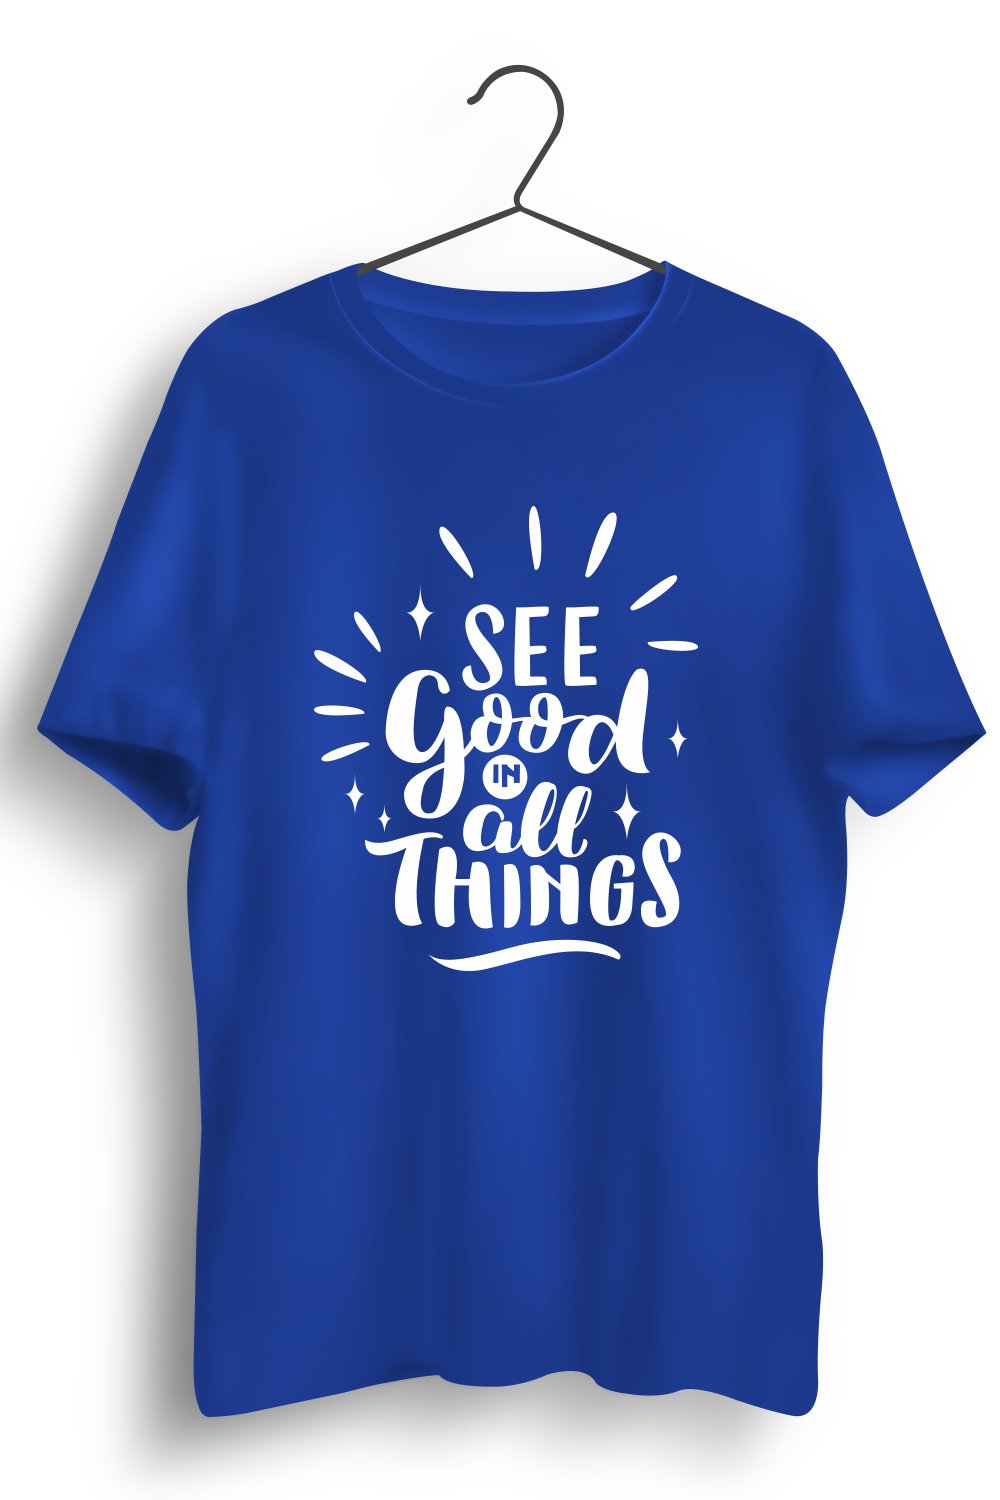 See Good In All Things Graphic Printed Blue Tshirt